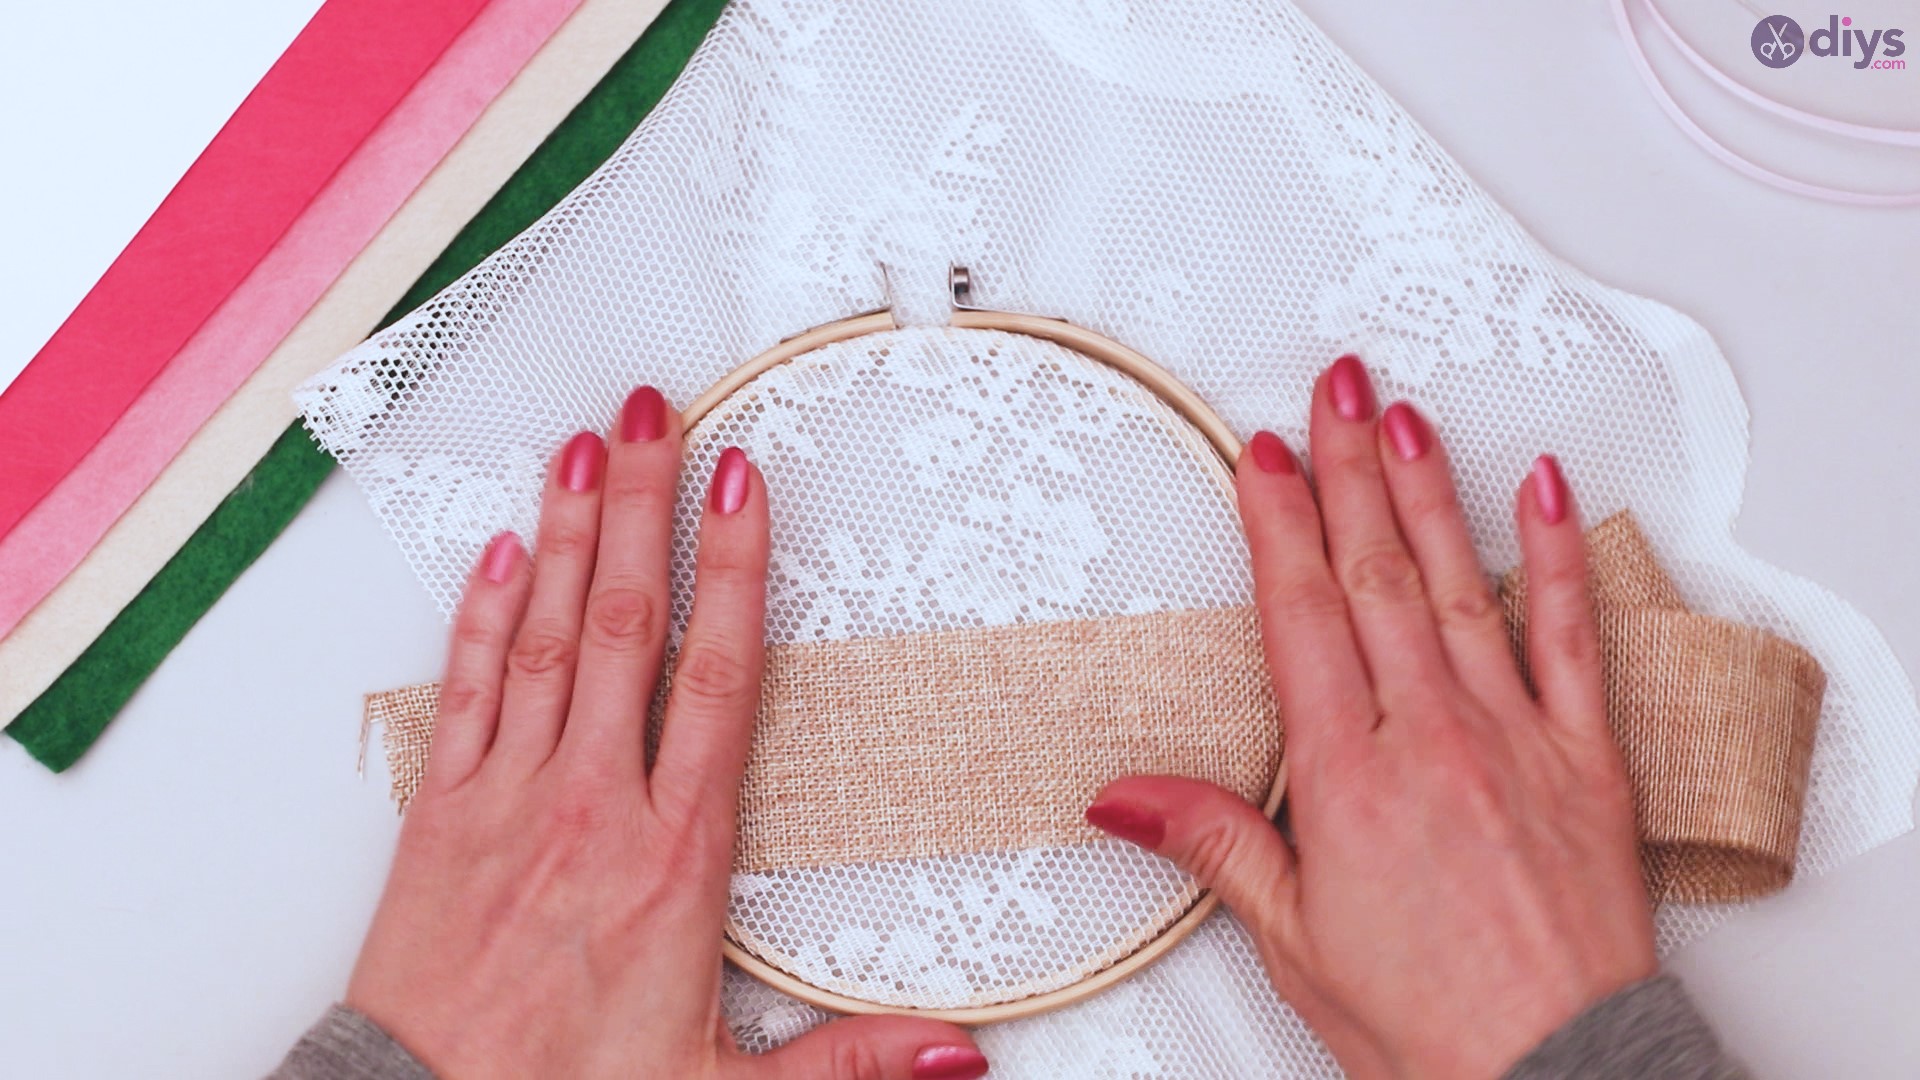 Diy embroidery hoop wall decor tutorial step by step (4)